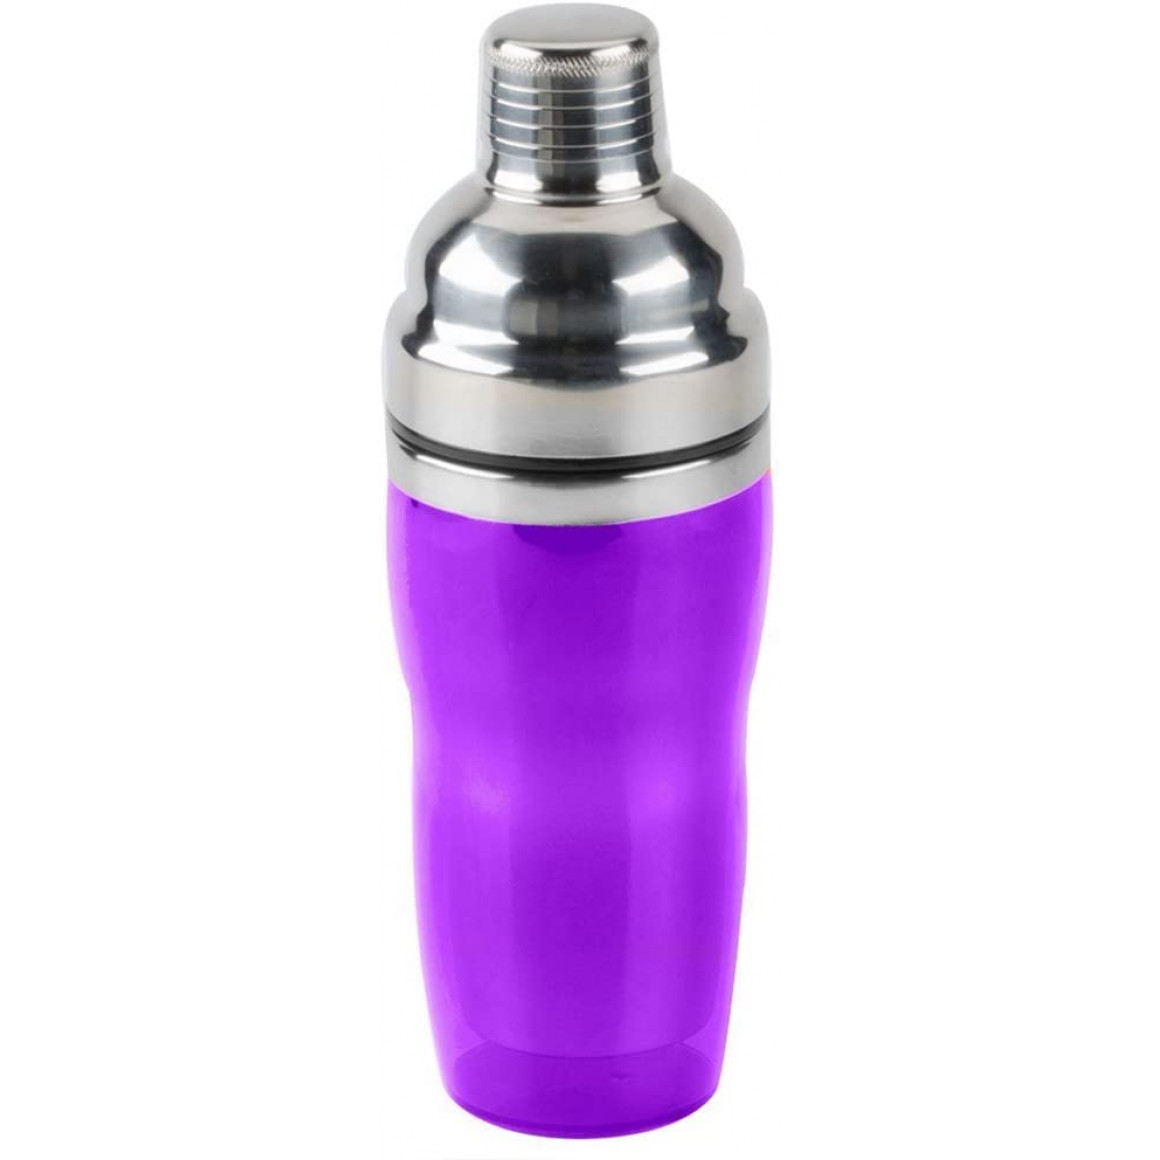 COCKTAIL SHAKER, STAINLESS STEEL, ACRYLIC, PURPLE, 16 OZ.